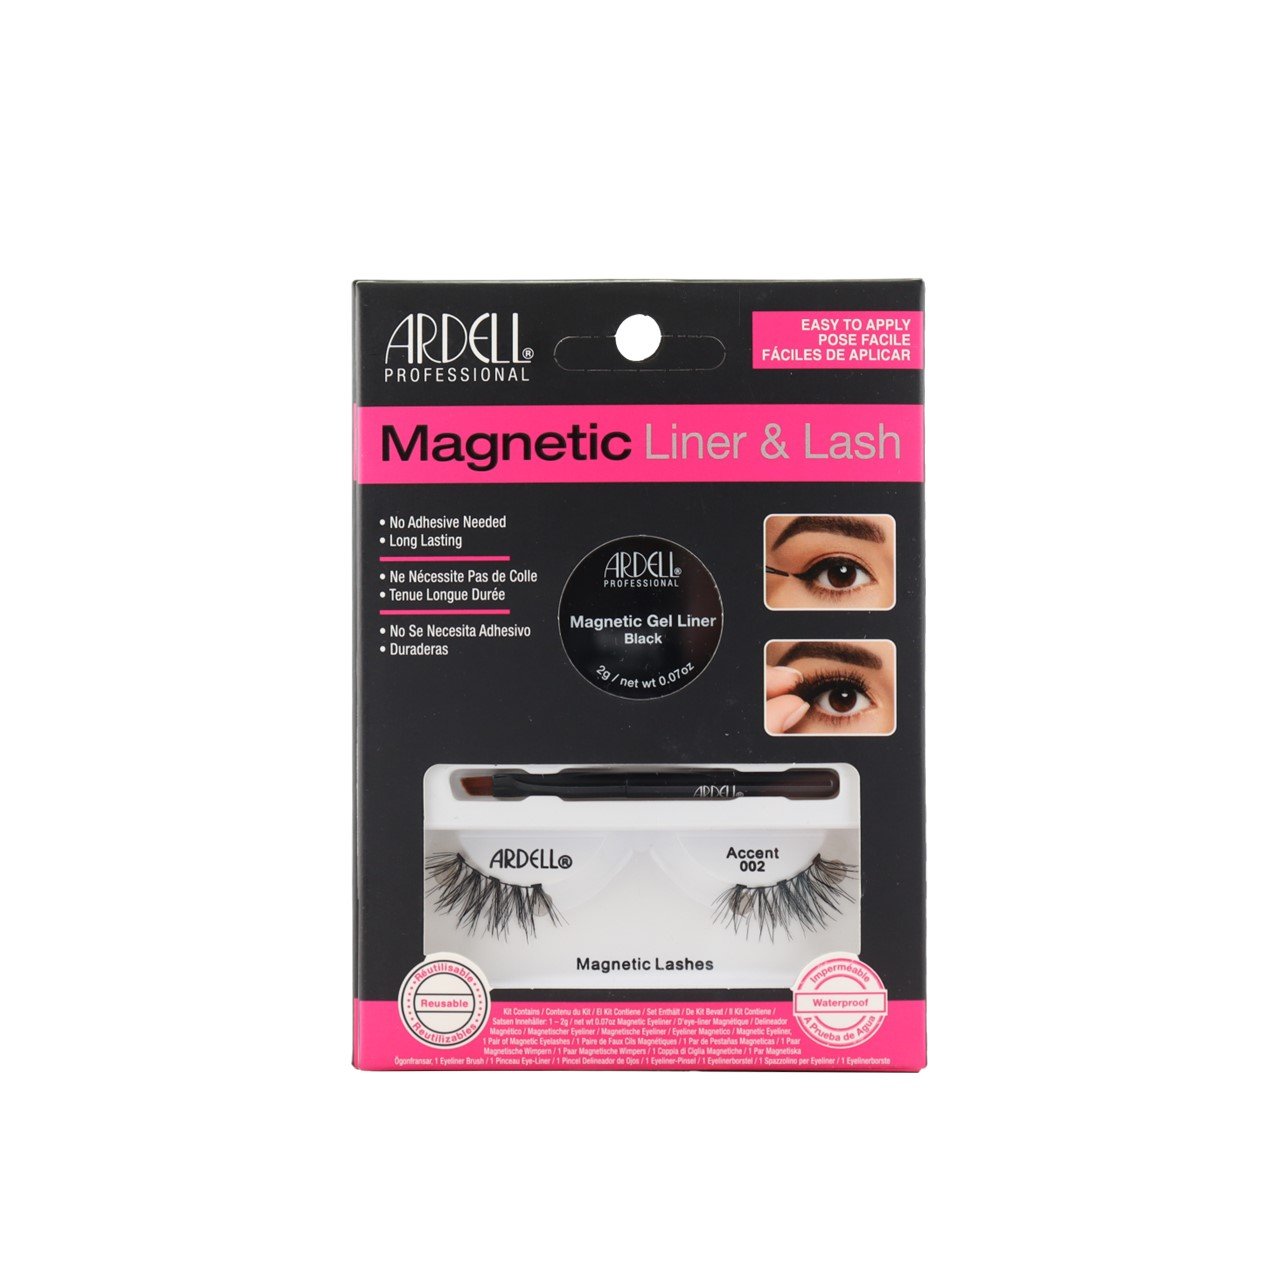 Ardell Magnetic Liner & Lash Accent 002 Kit